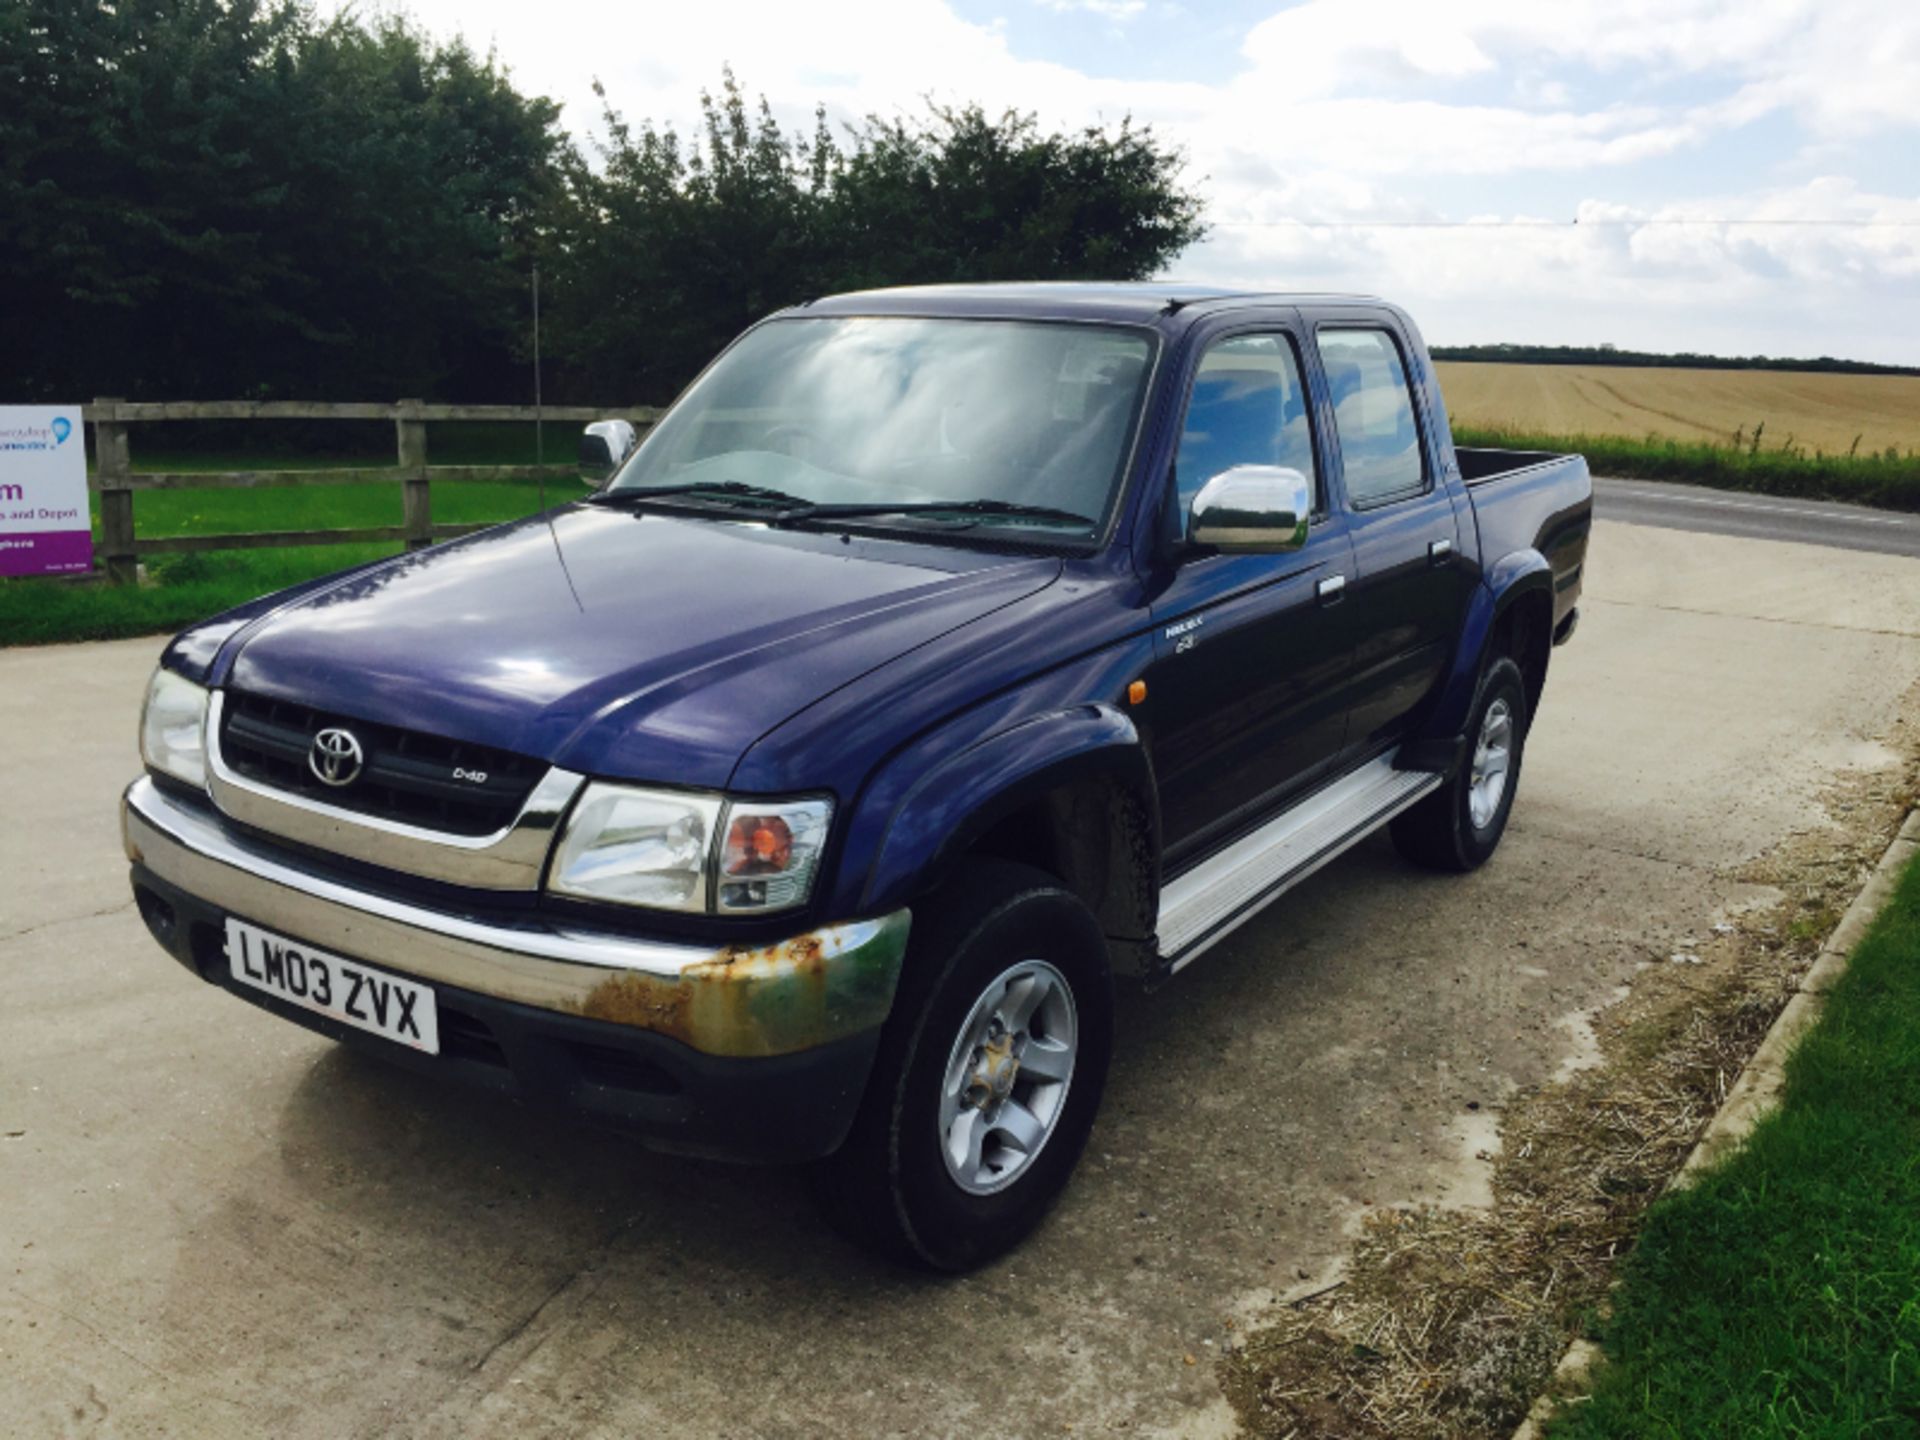 TOYOTA HILUX *VX MODEL* 2.5 (2003-03 REG) **AIR CON** EX COMPANY OWNED* ONLY COVERED 85,099 MILES!!! - Image 6 of 8